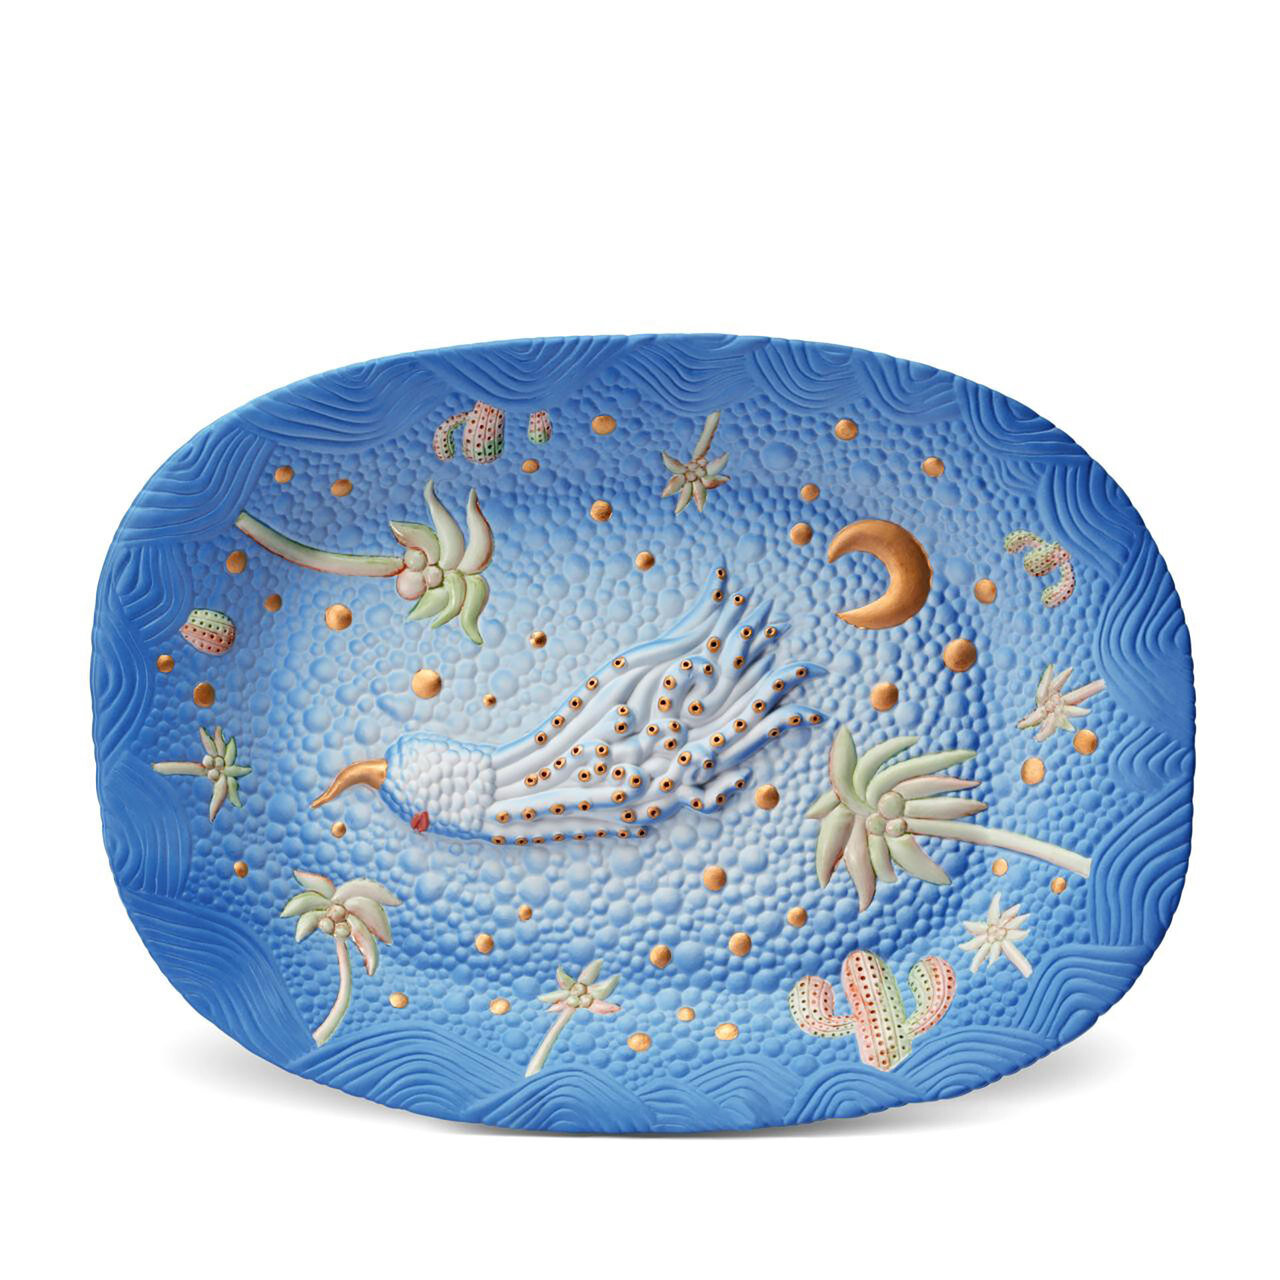 L'Objet Haas Celestial Octopus Tray - Limited Edition of 100 HB266